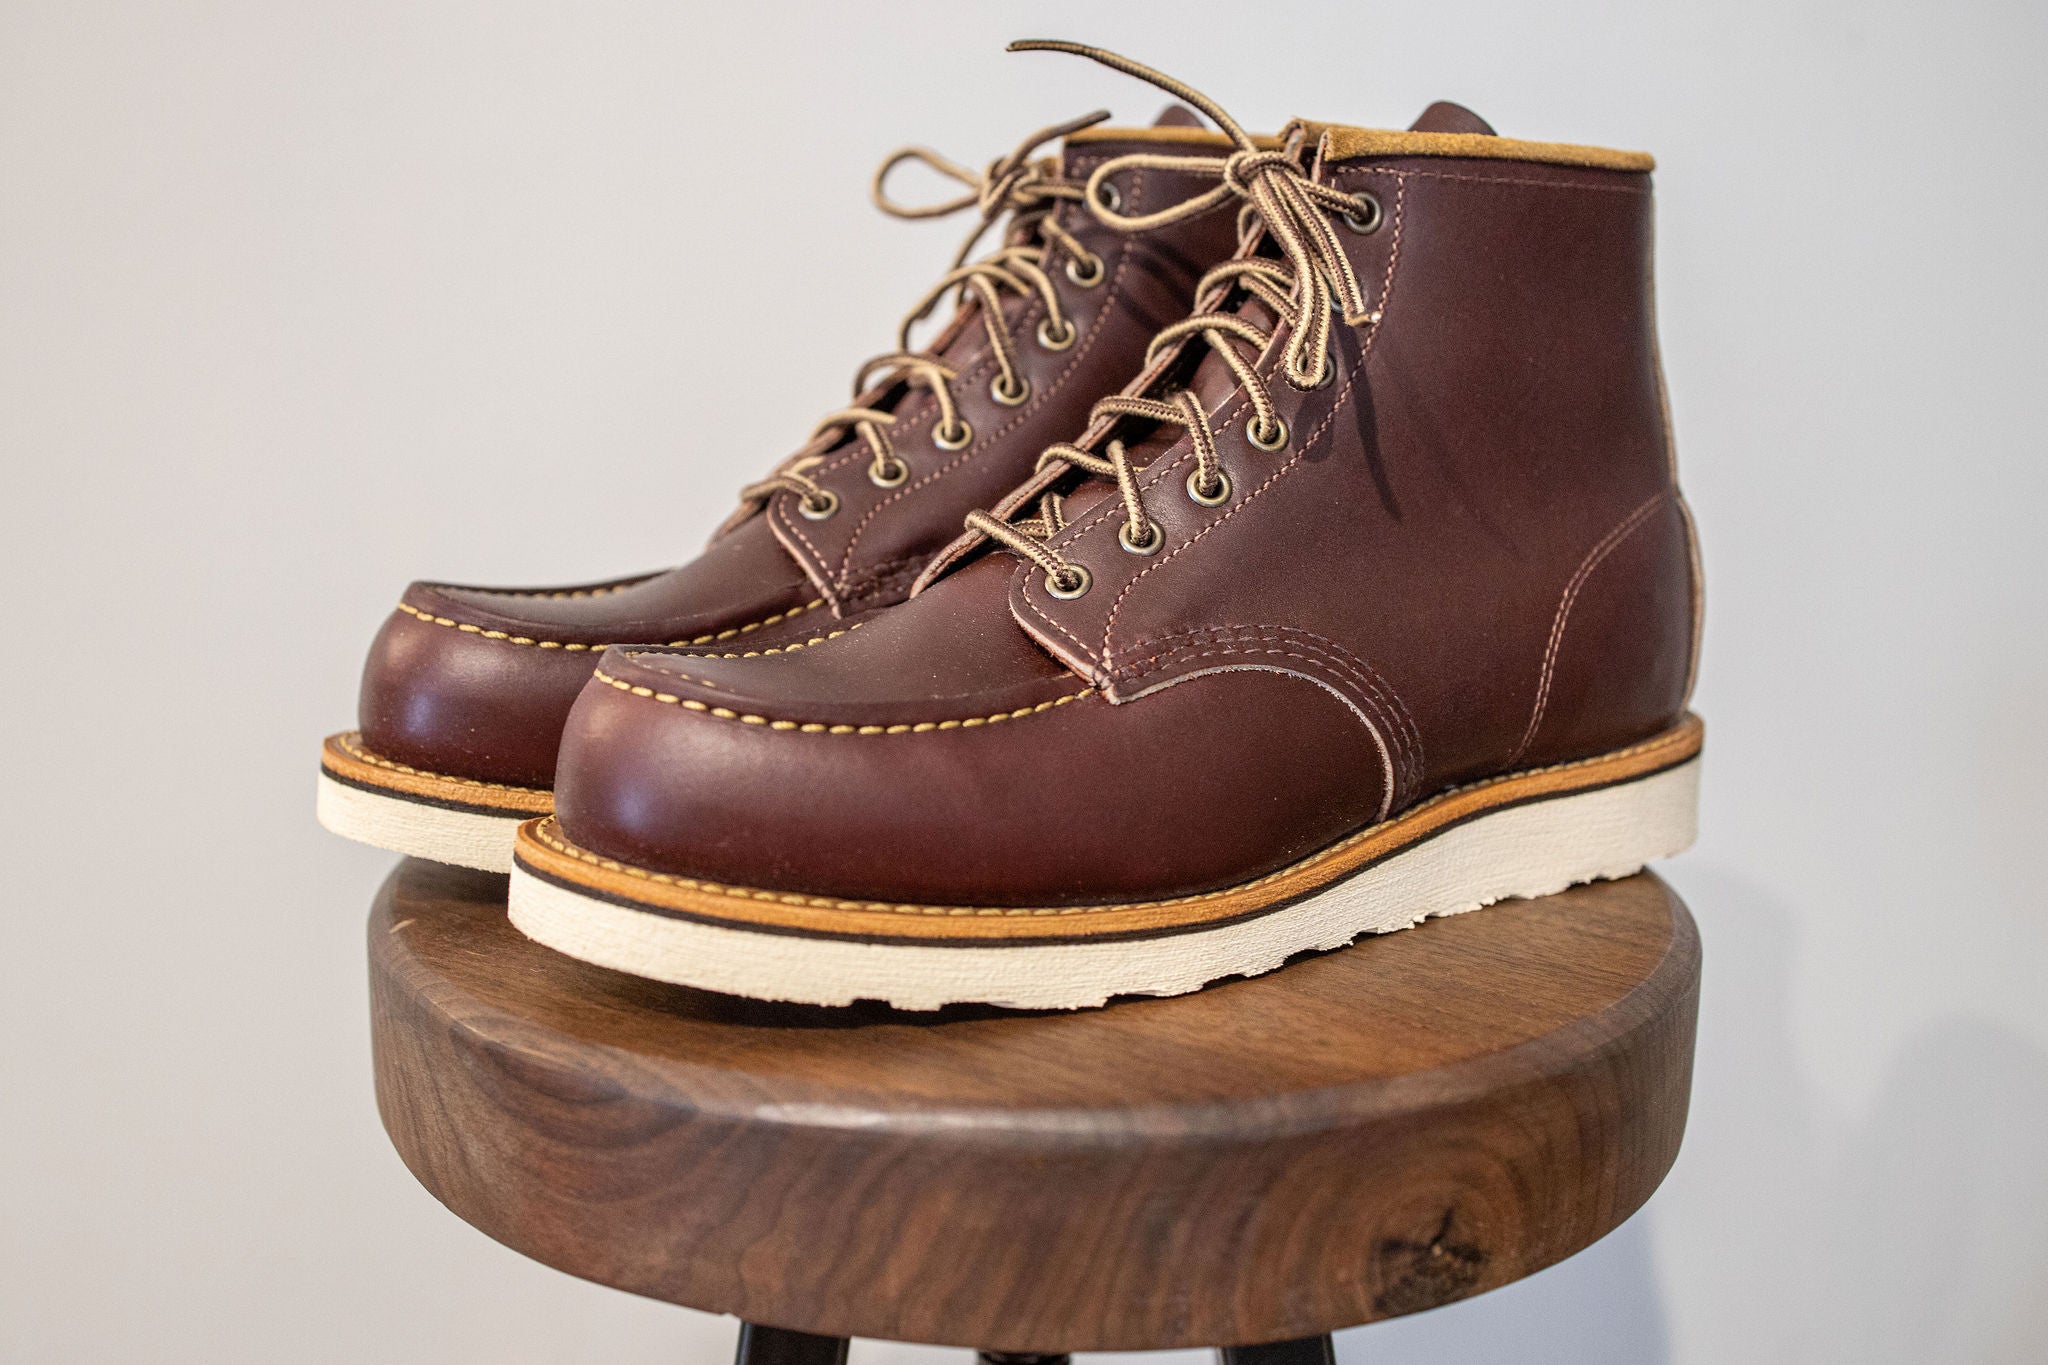 red wing heritage moc